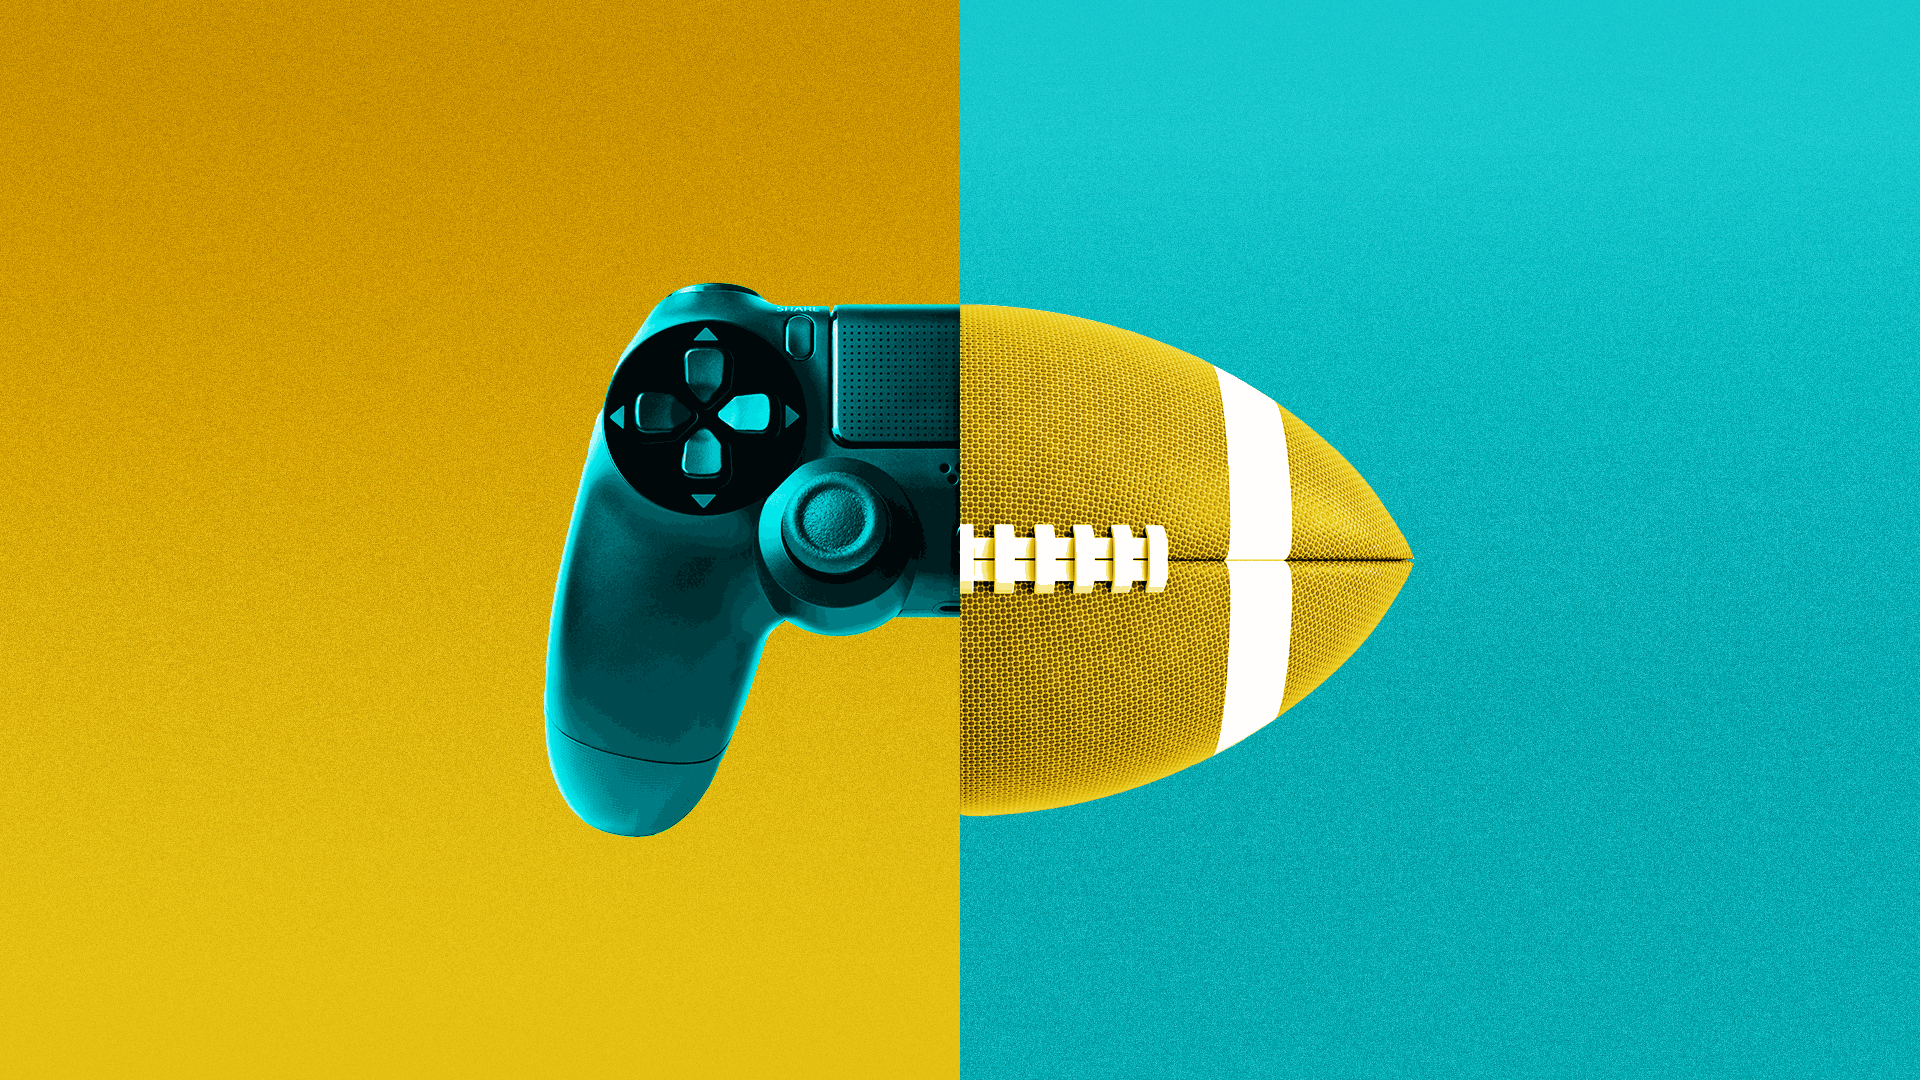 Illustration of a game controller morphing into a football